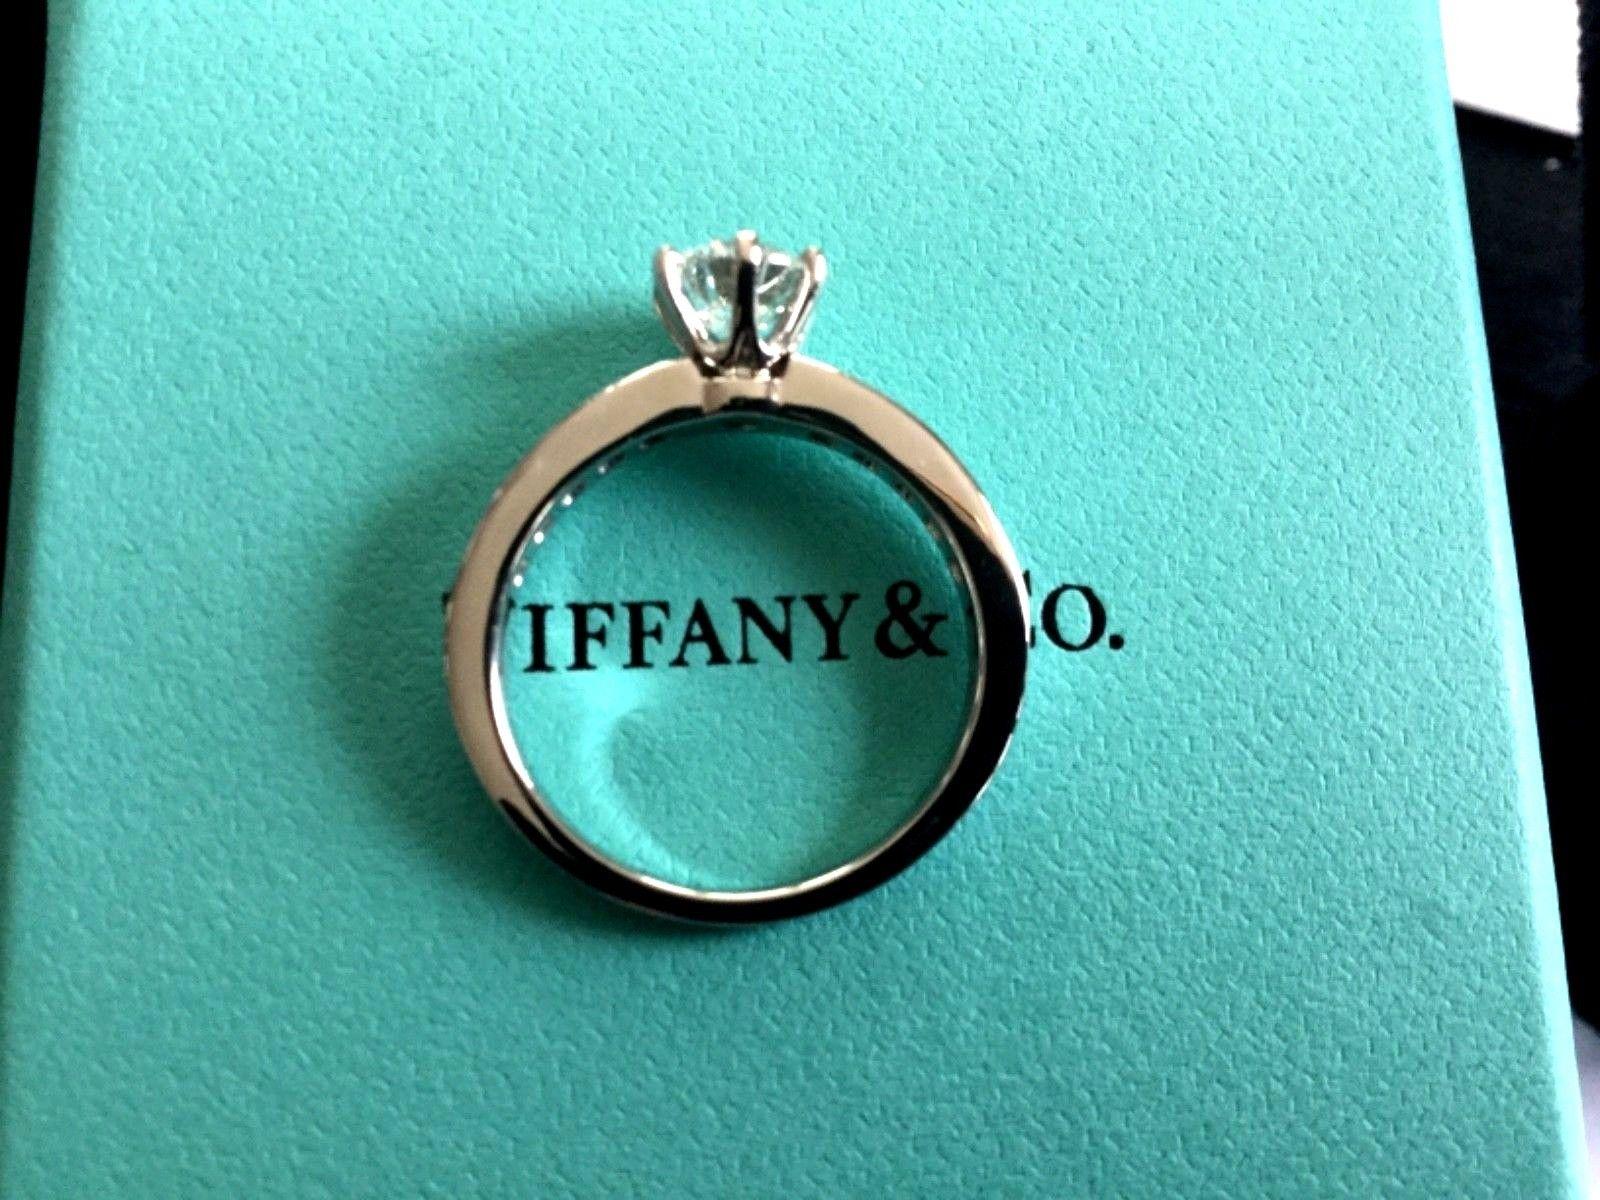 Tiffany & Co. Platinum Diamond .60 Carat H VS1 Triple Exc Round Engagement Ring In Excellent Condition For Sale In Middletown, DE